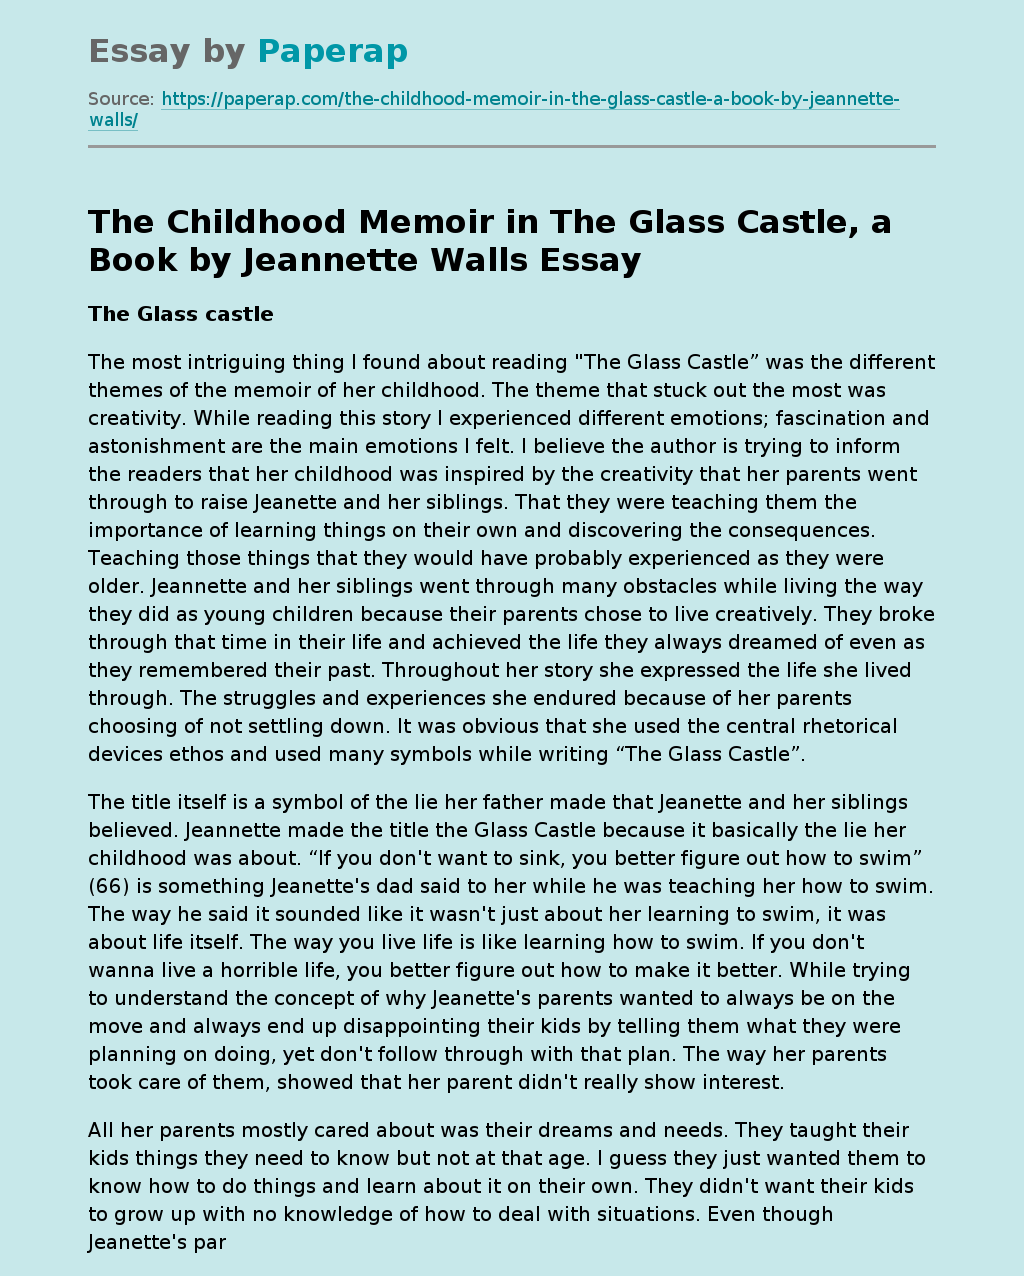 The Childhood Memoir in The Glass Castle, a Book by Jeannette Walls